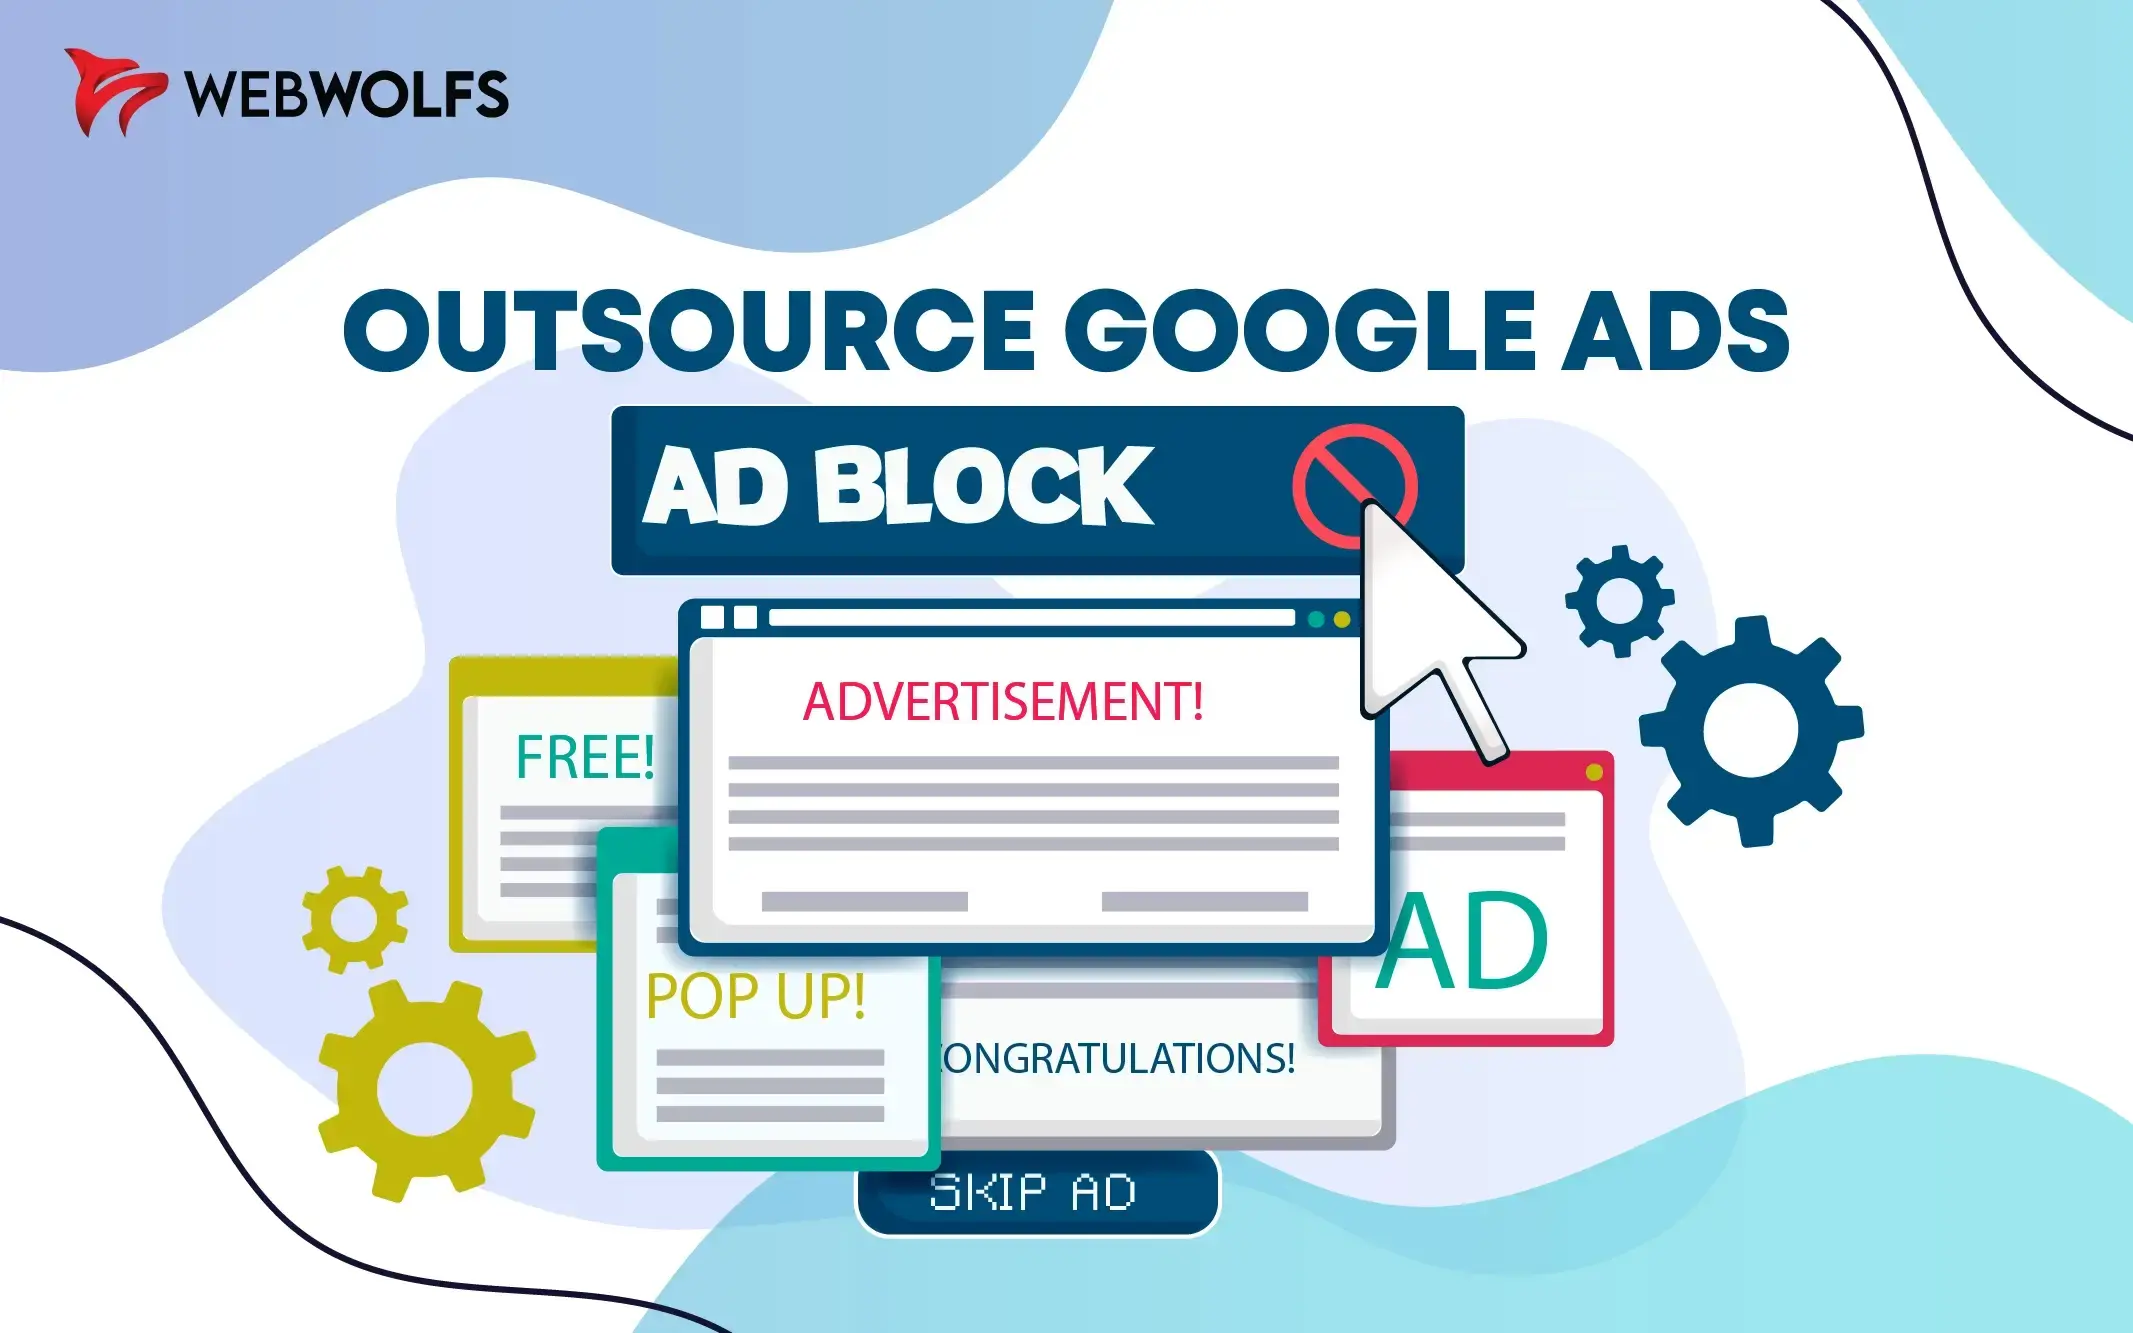 Achieving More with Less: The Benefits to Outsource Google Ads